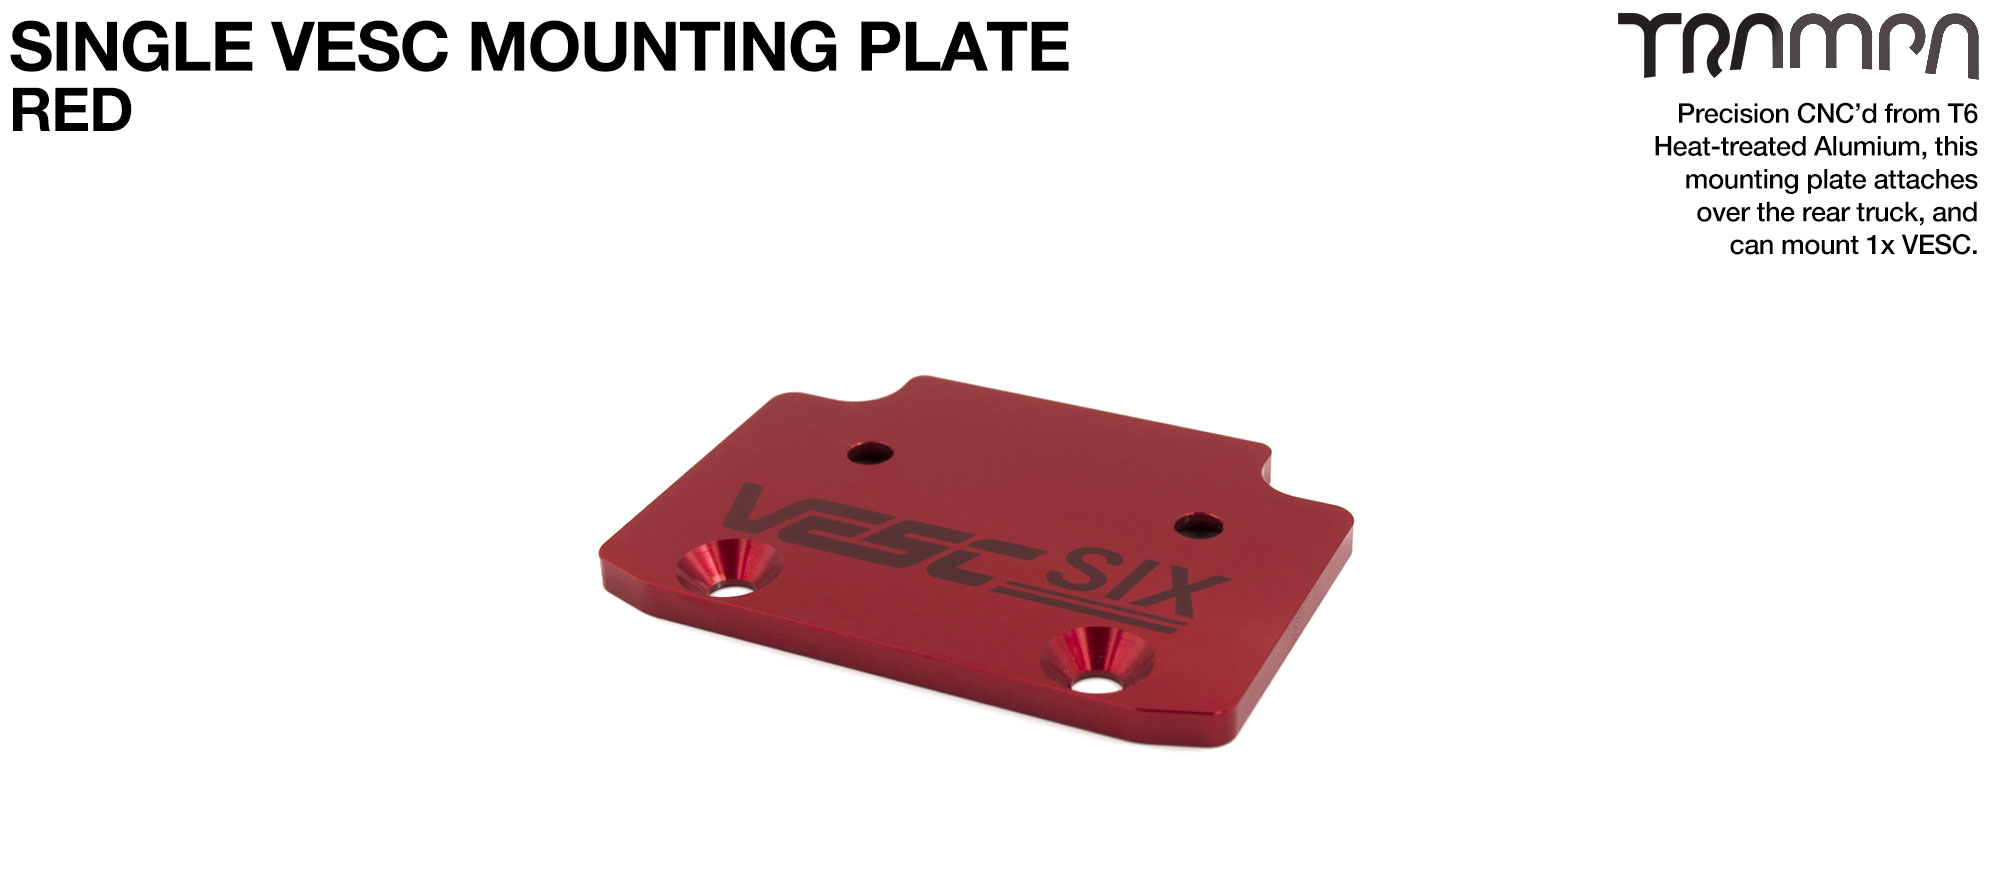 ALUMINIUM Mounting Plate for 1x VESC 6 & Fixing Bolts - RED 